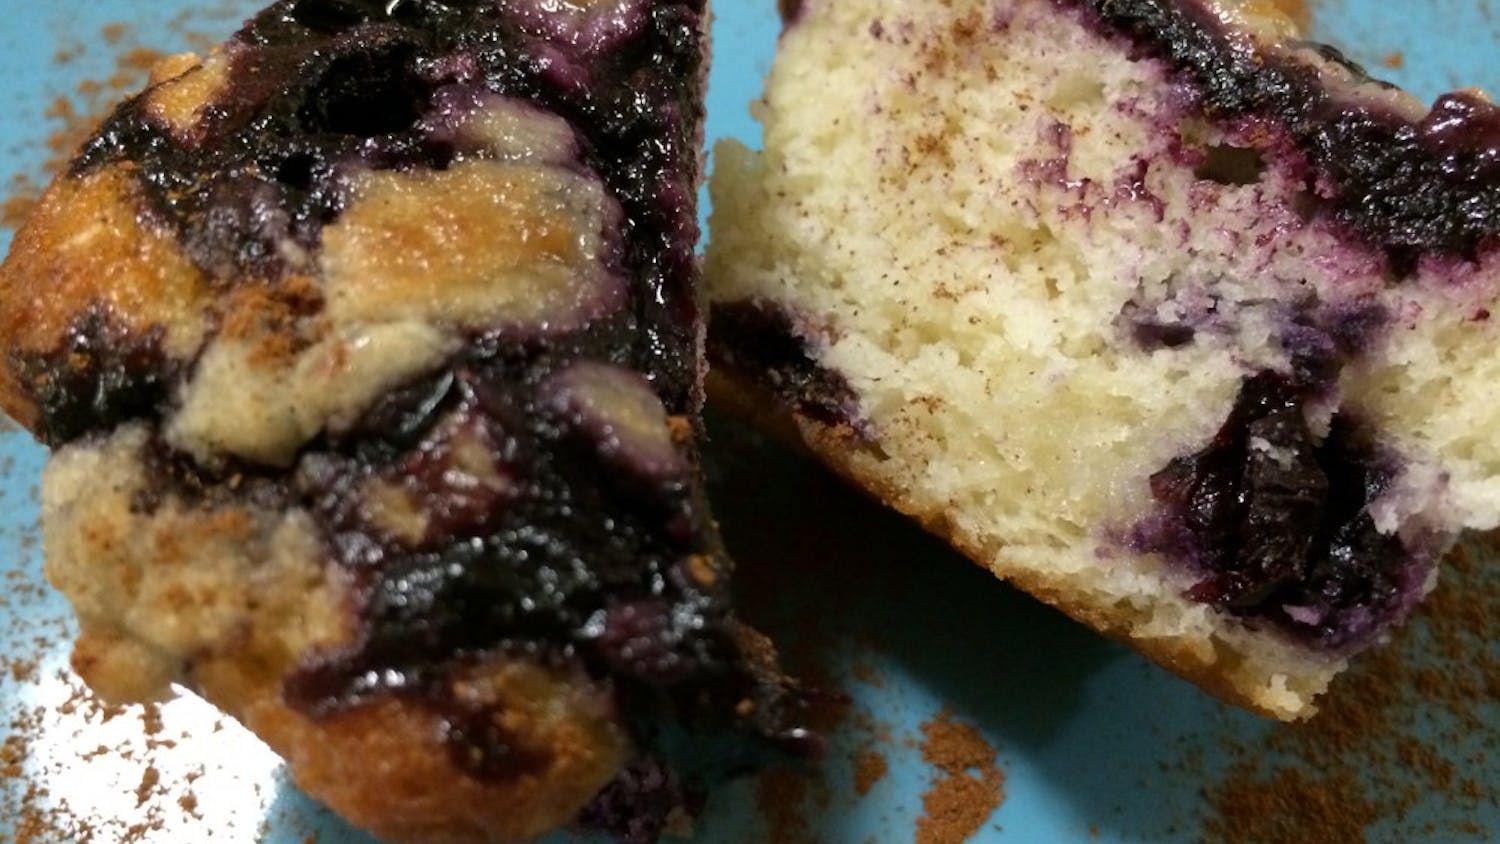 Blueberry muffins pair well with a cup of coffee.